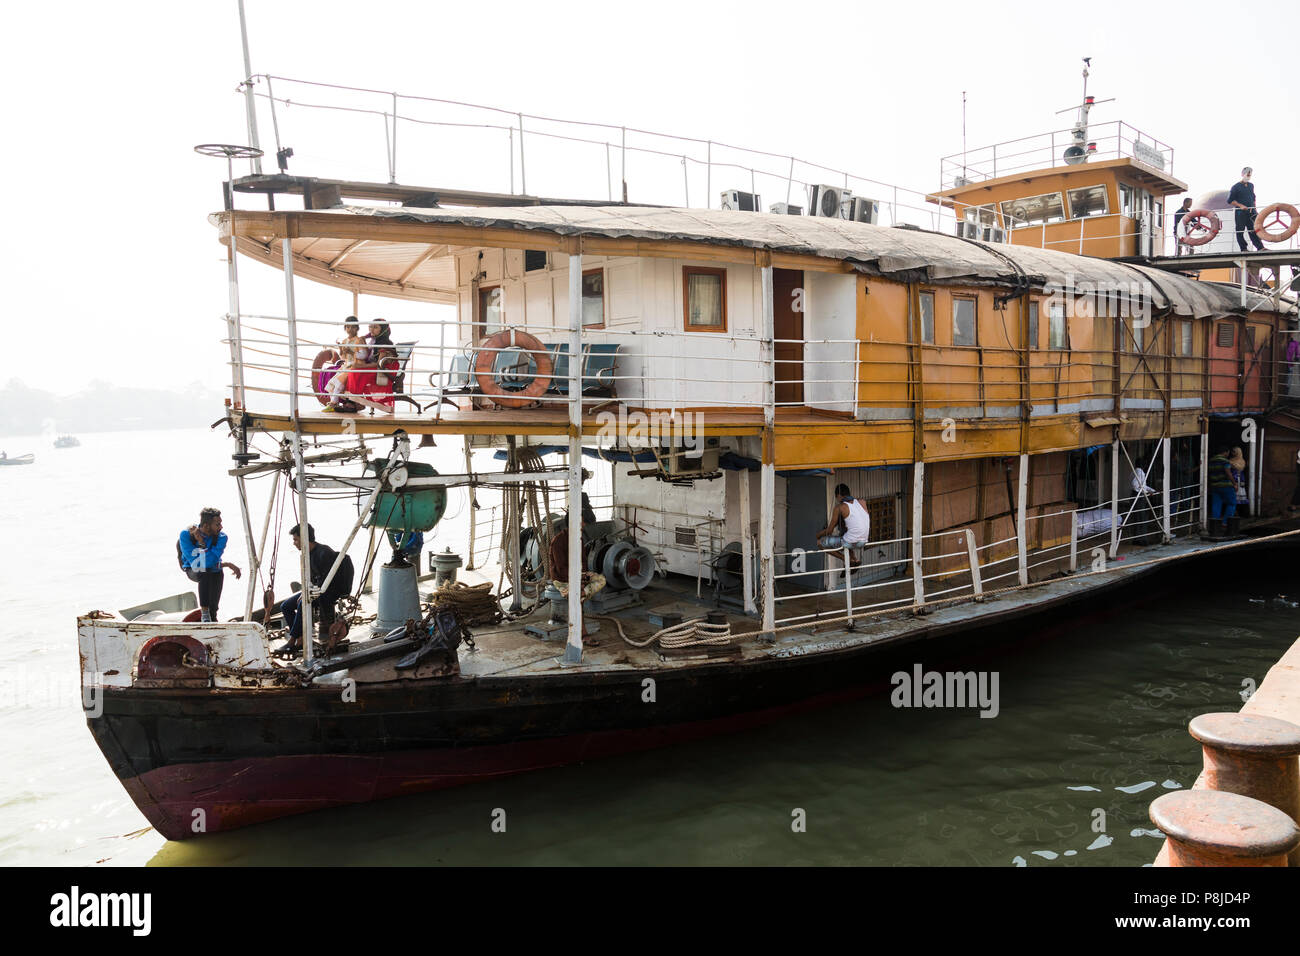 Barisal, Bangladesh, February 27 2017: View of the bow and first class of The Rocket - an ancient paddle steamer operating on the rivers of Bangladesh Stock Photo